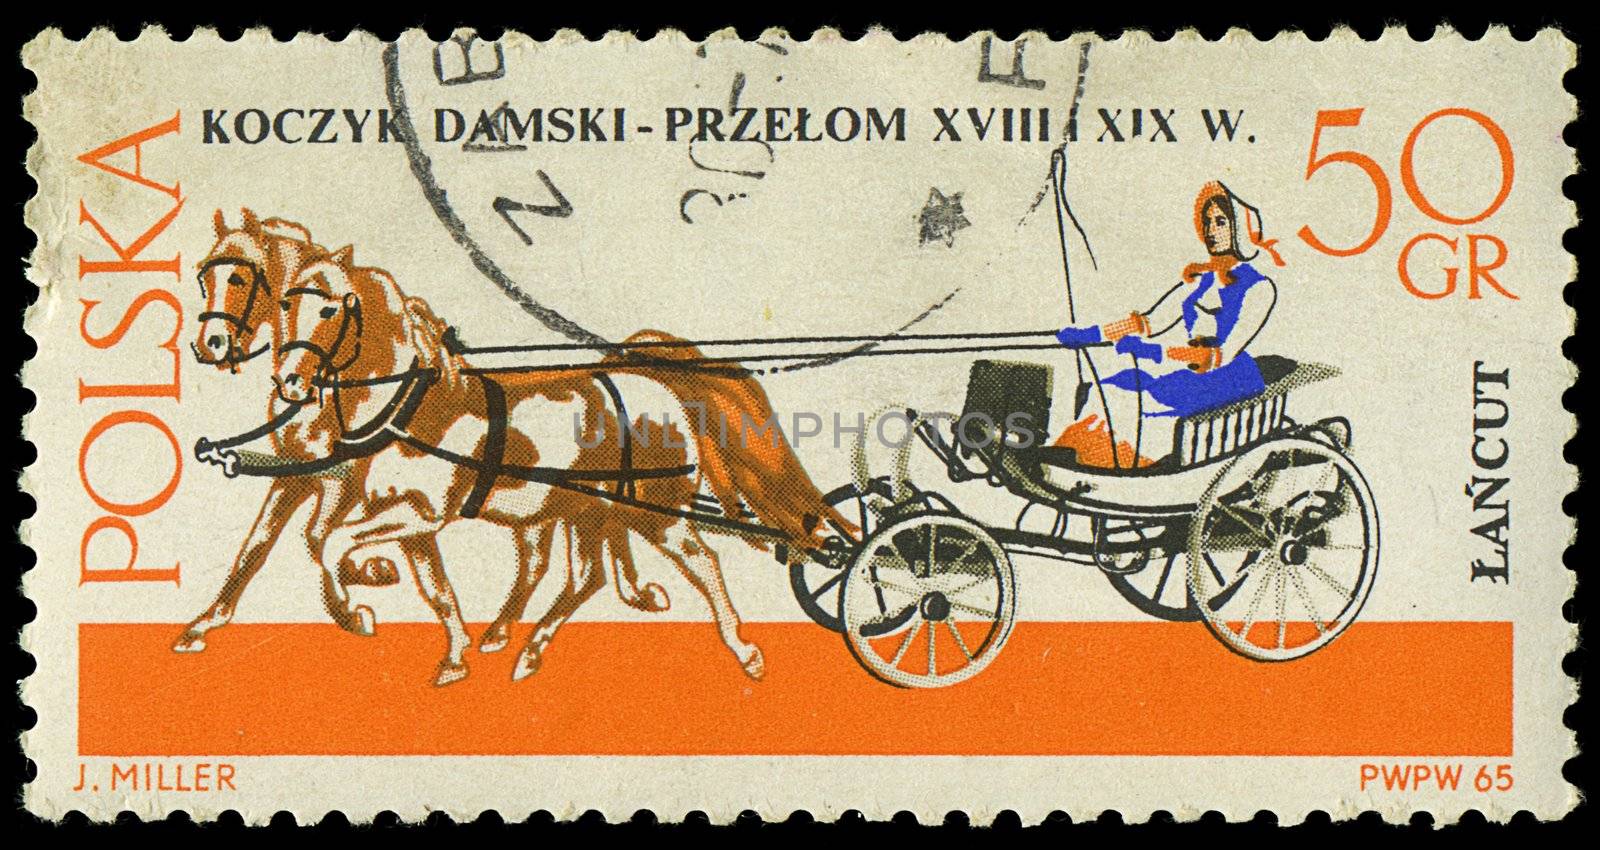 POLAND - CIRCA 1965: a stamp printed in Poland showing horses drawing carriage, circa 1965